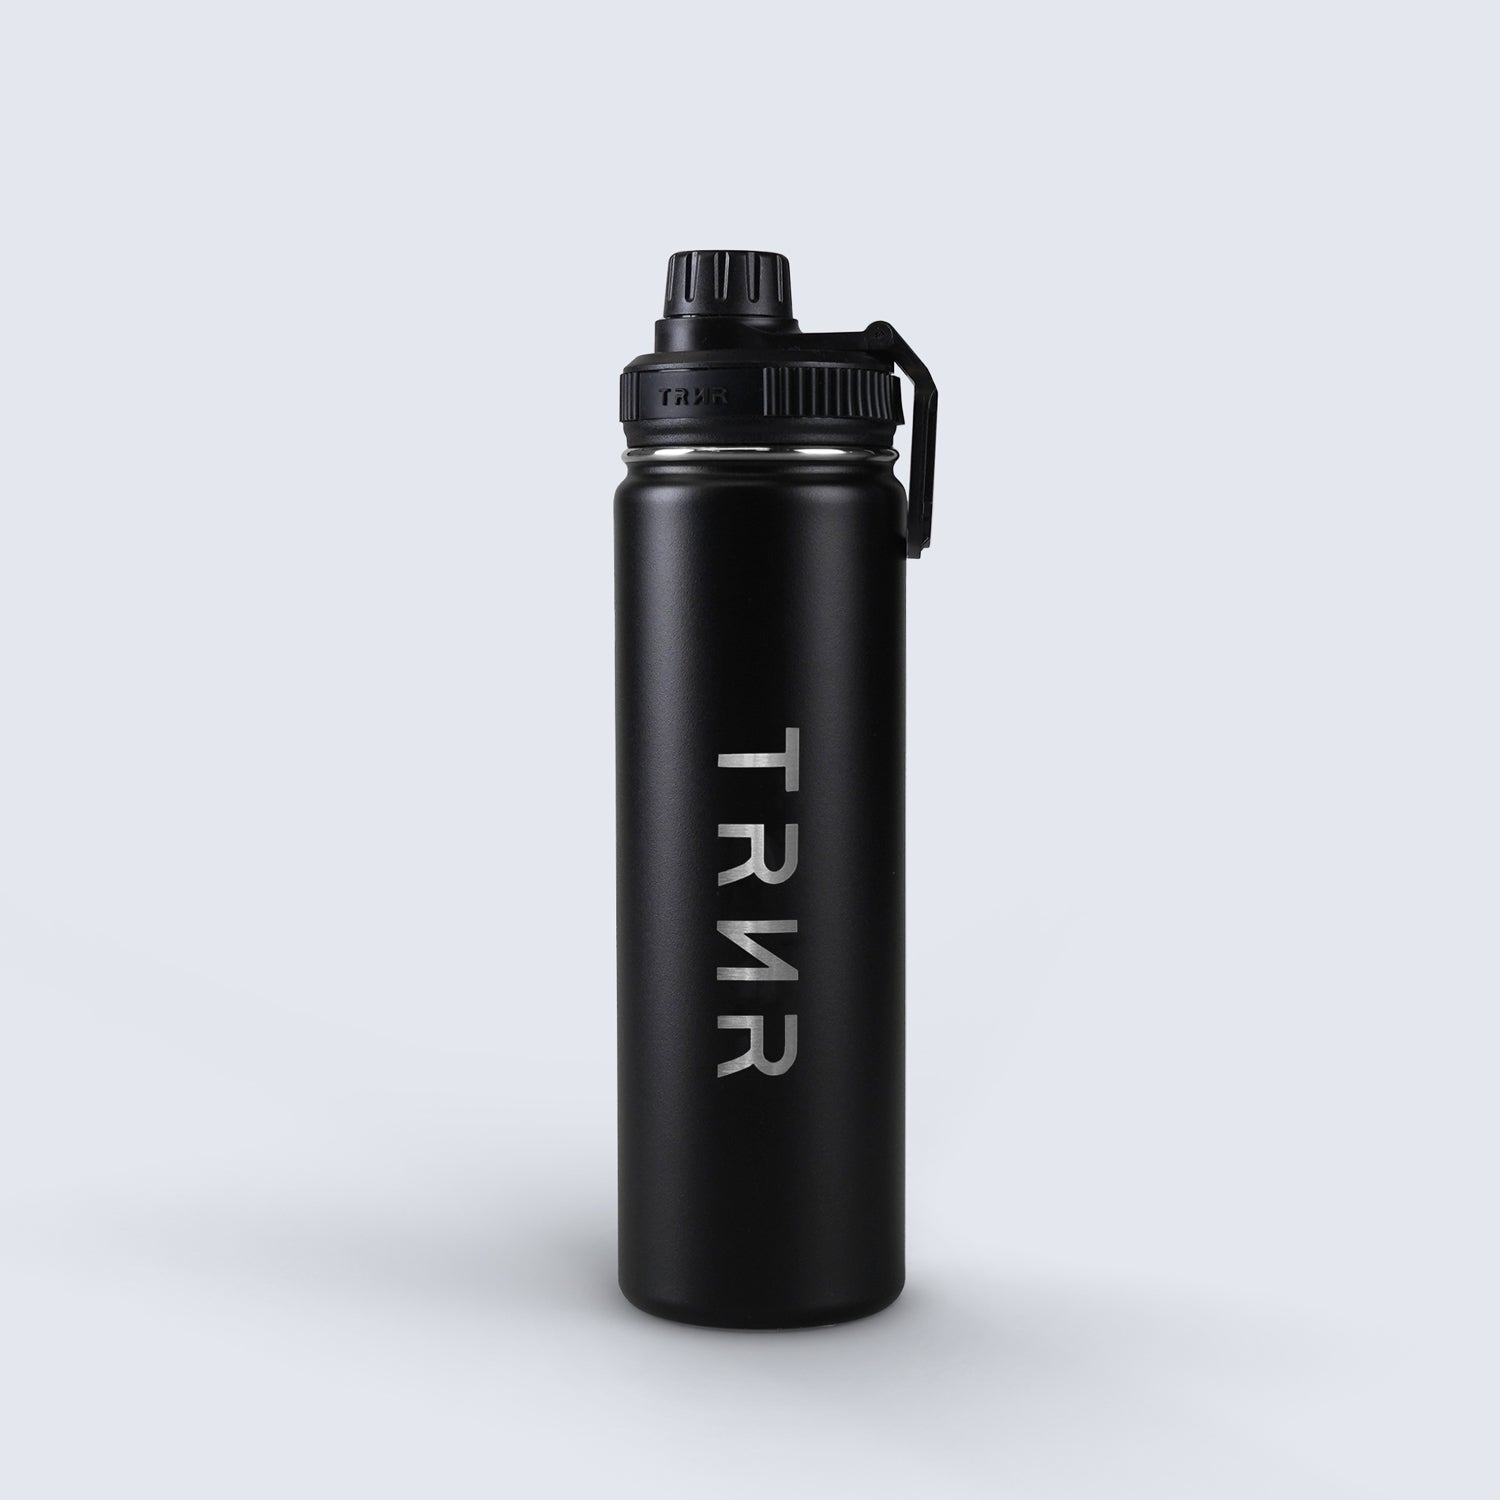 TRNR Studio Bottle (Black) in 710 ml capacity | Product Overview Featuring TRNR Logo and Screw Lid with Handle